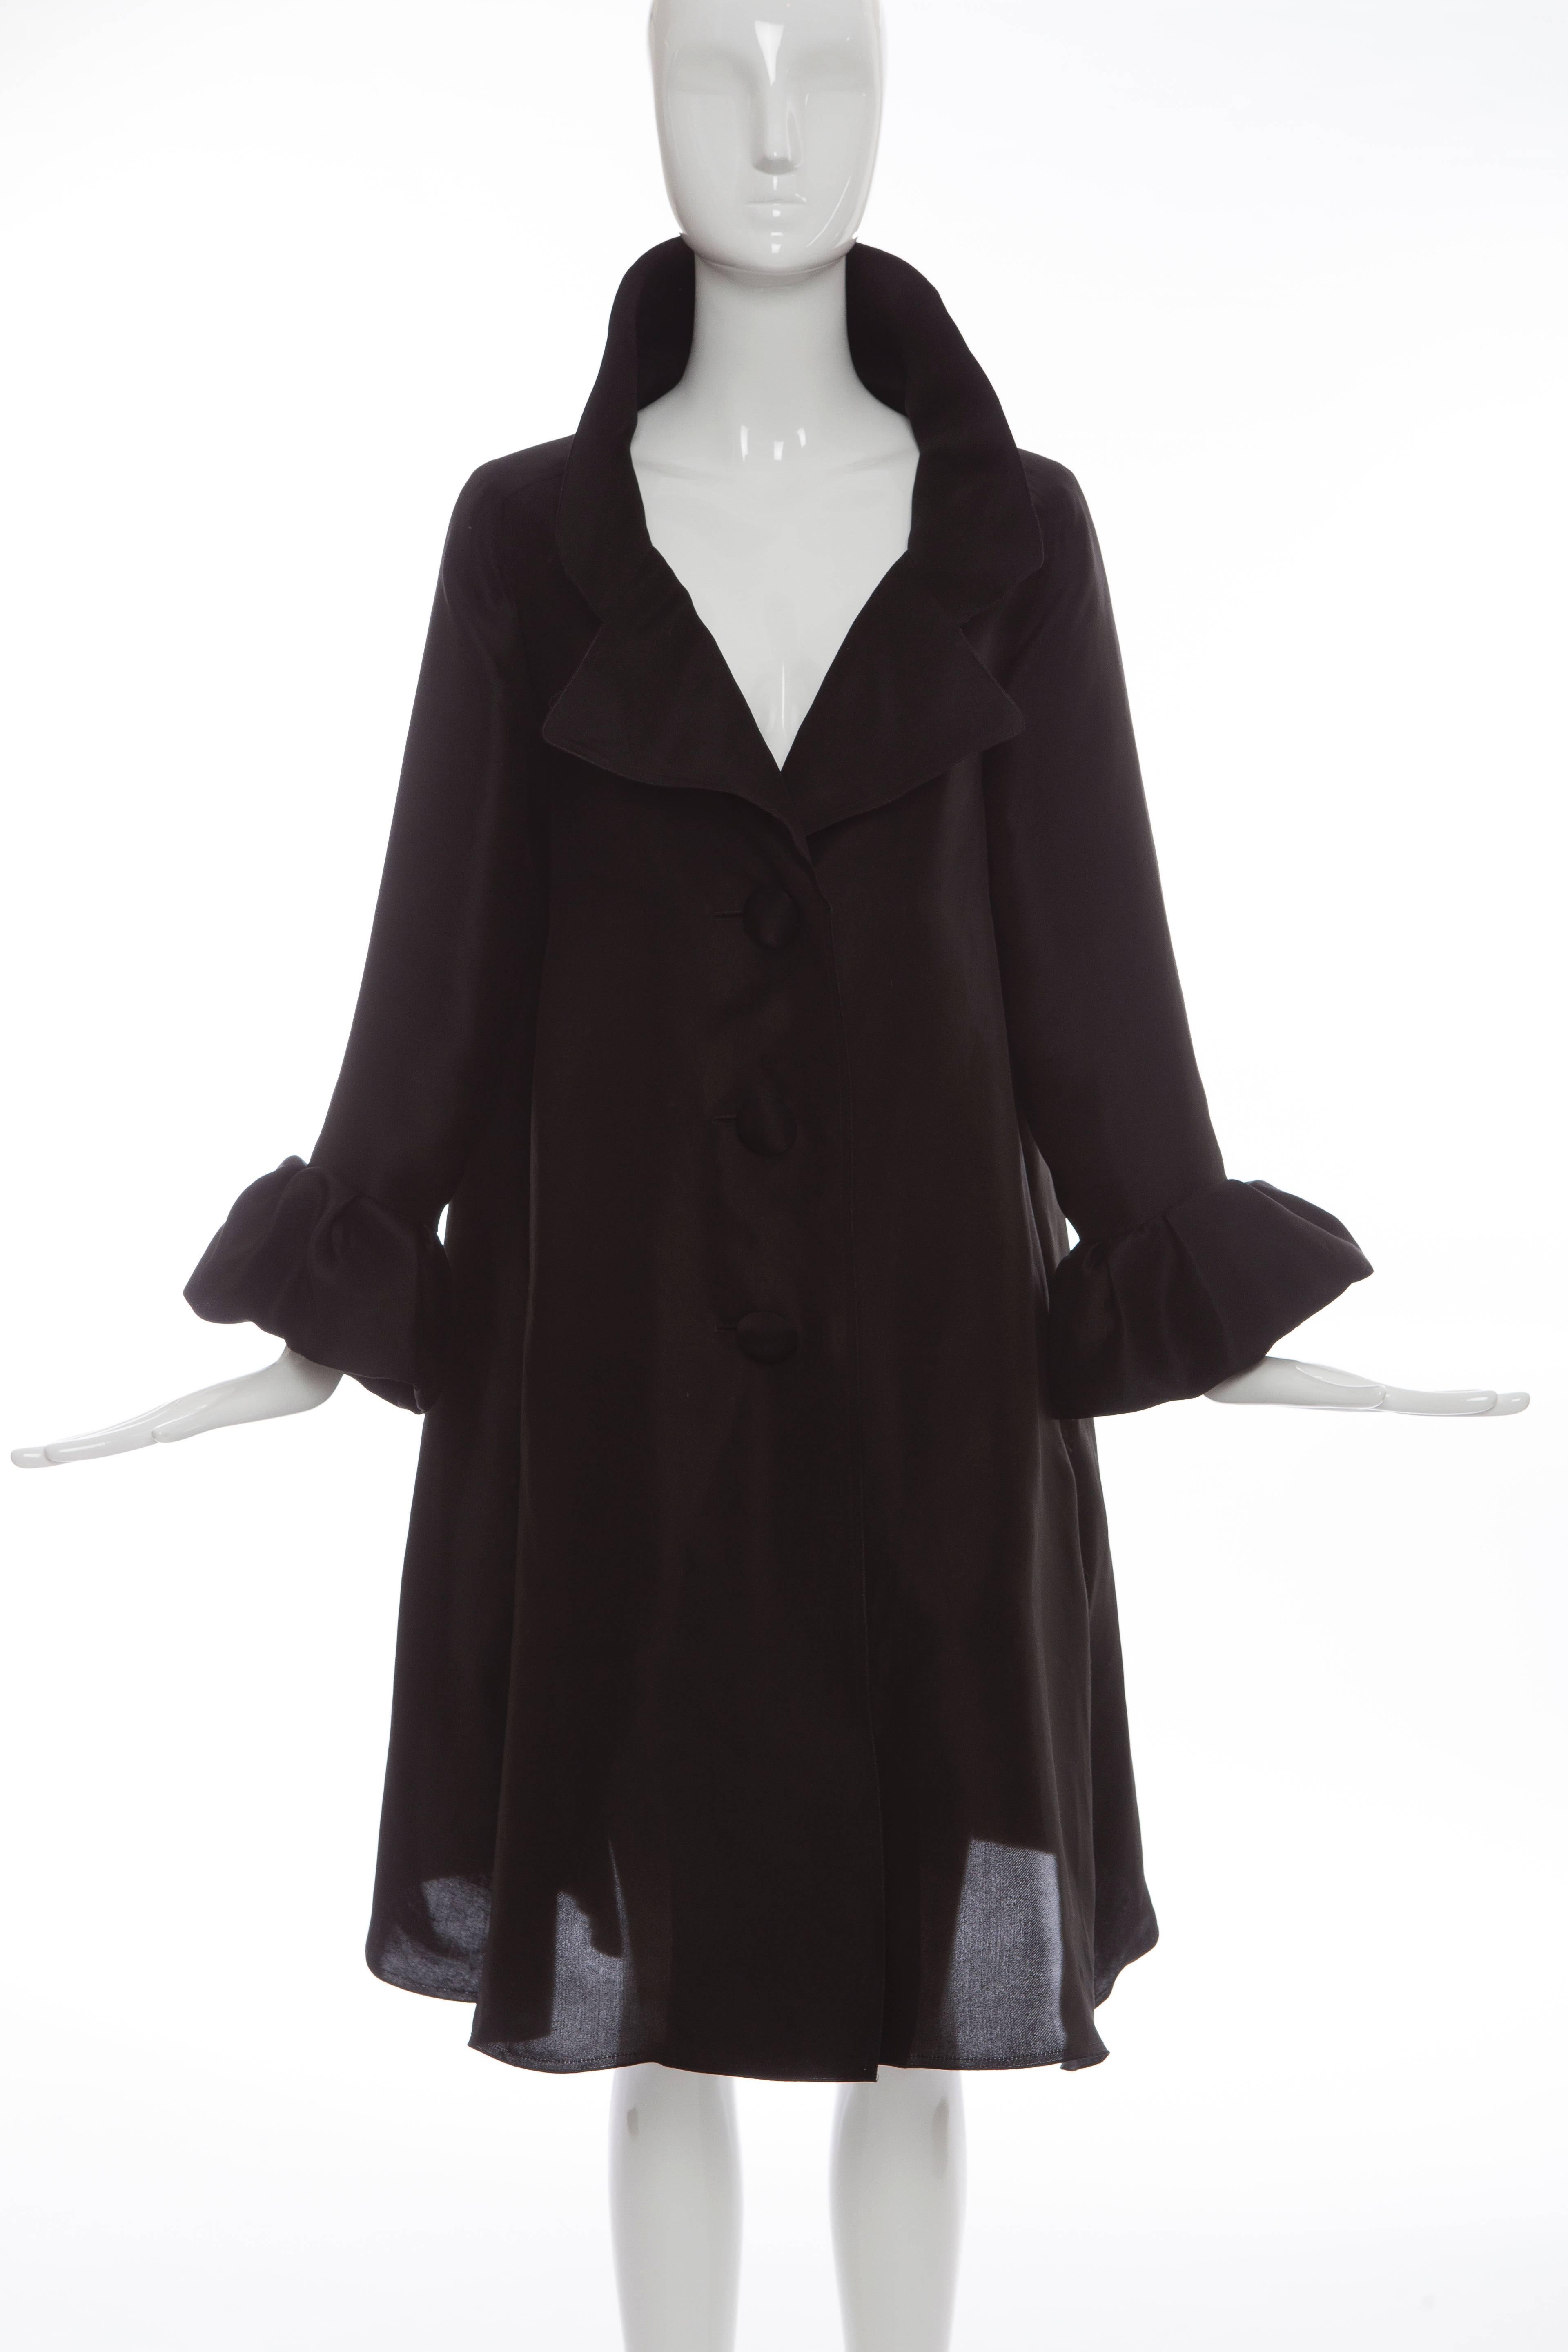  Alber Elbaz for Lanvin Autumn-Winter 2006, black silk lightweight evening coat with notched collar, flounced sleeve, two front pockets at hips and front button closure.

FR. 38
US. 6

 Bust 42”, Waist 48”, Shoulder 16”, Length 39.5”, Sleeve 30”